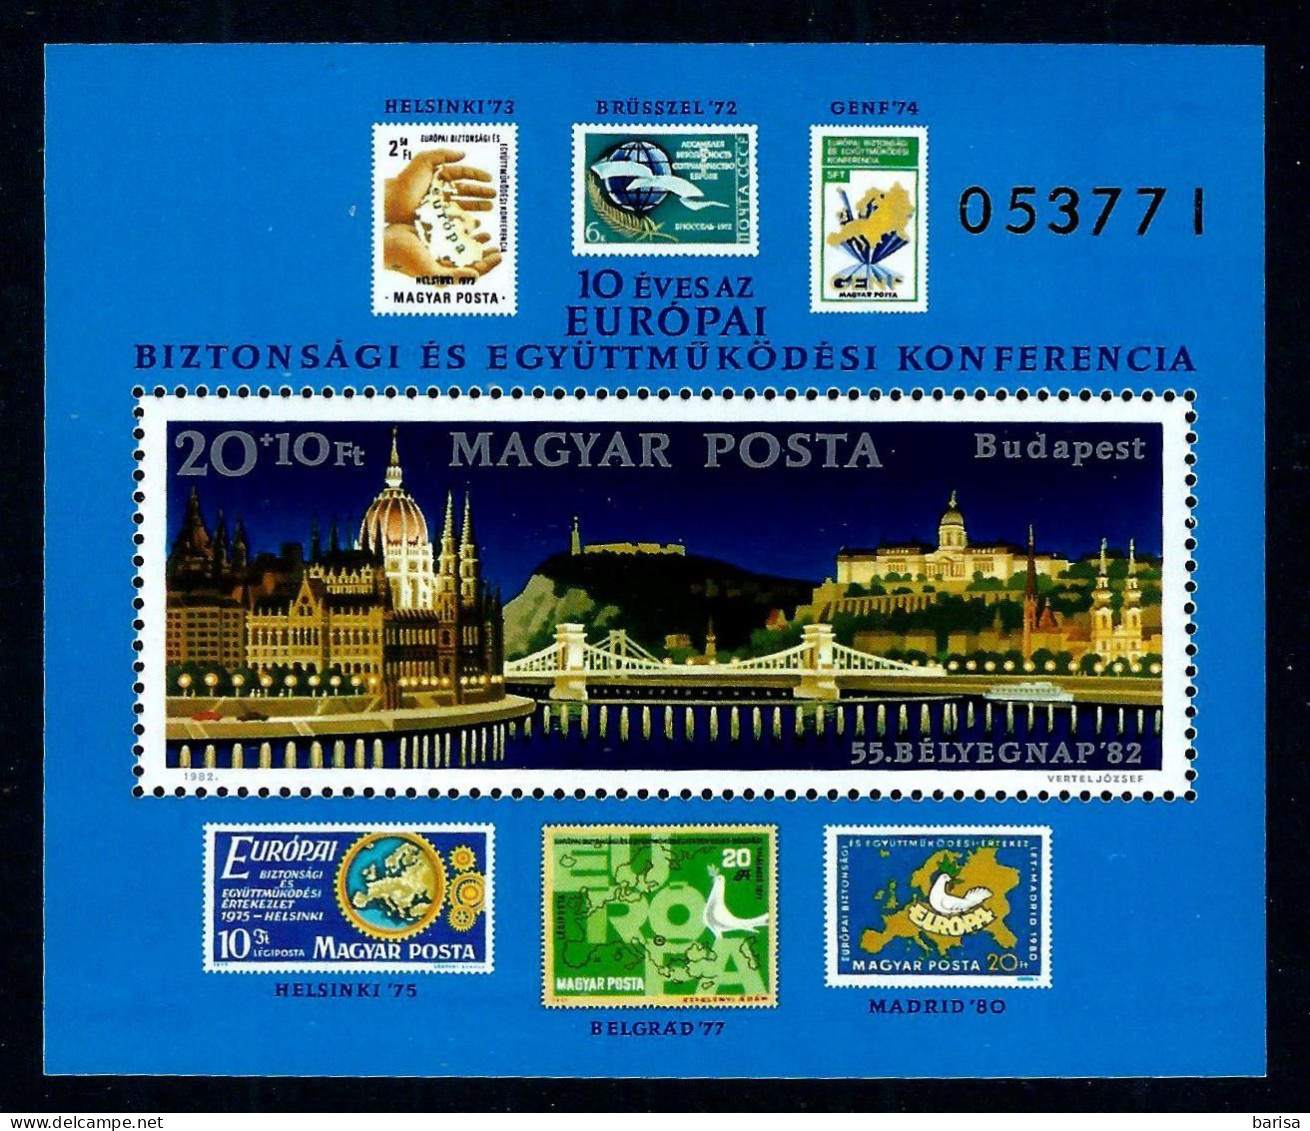 (A6) Hungary 1982: 10 Years Conference On European Security And Cooperation (CSCE) ** (MNH) - Europäischer Gedanke